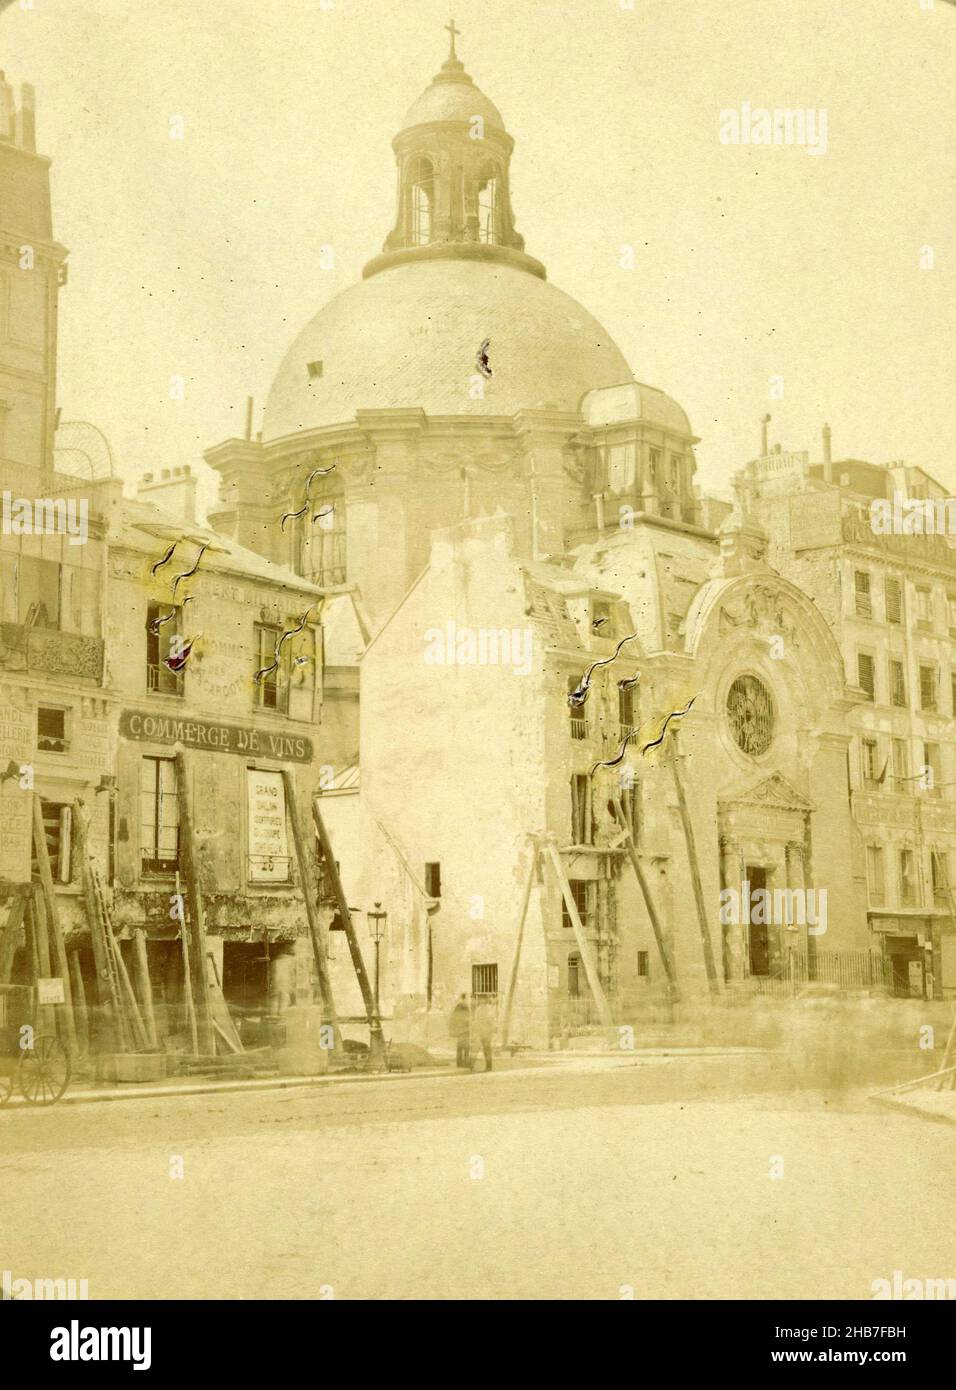 Destruction around the Temple du Marais by the Paris Commune, Destructions de la Commune, Eglise Ste Marie (original title), Like stereotissues, this photograph was made to be viewed in transmitted light. This allows color effects and the suggestion of flames to be seen., Eugène Hanau (mentioned on object), Paris, 1871, cardboard, paper, albumen print, cutting, height 178 mm × width 140 mmheight 142 mm × width 107 mm Stock Photo